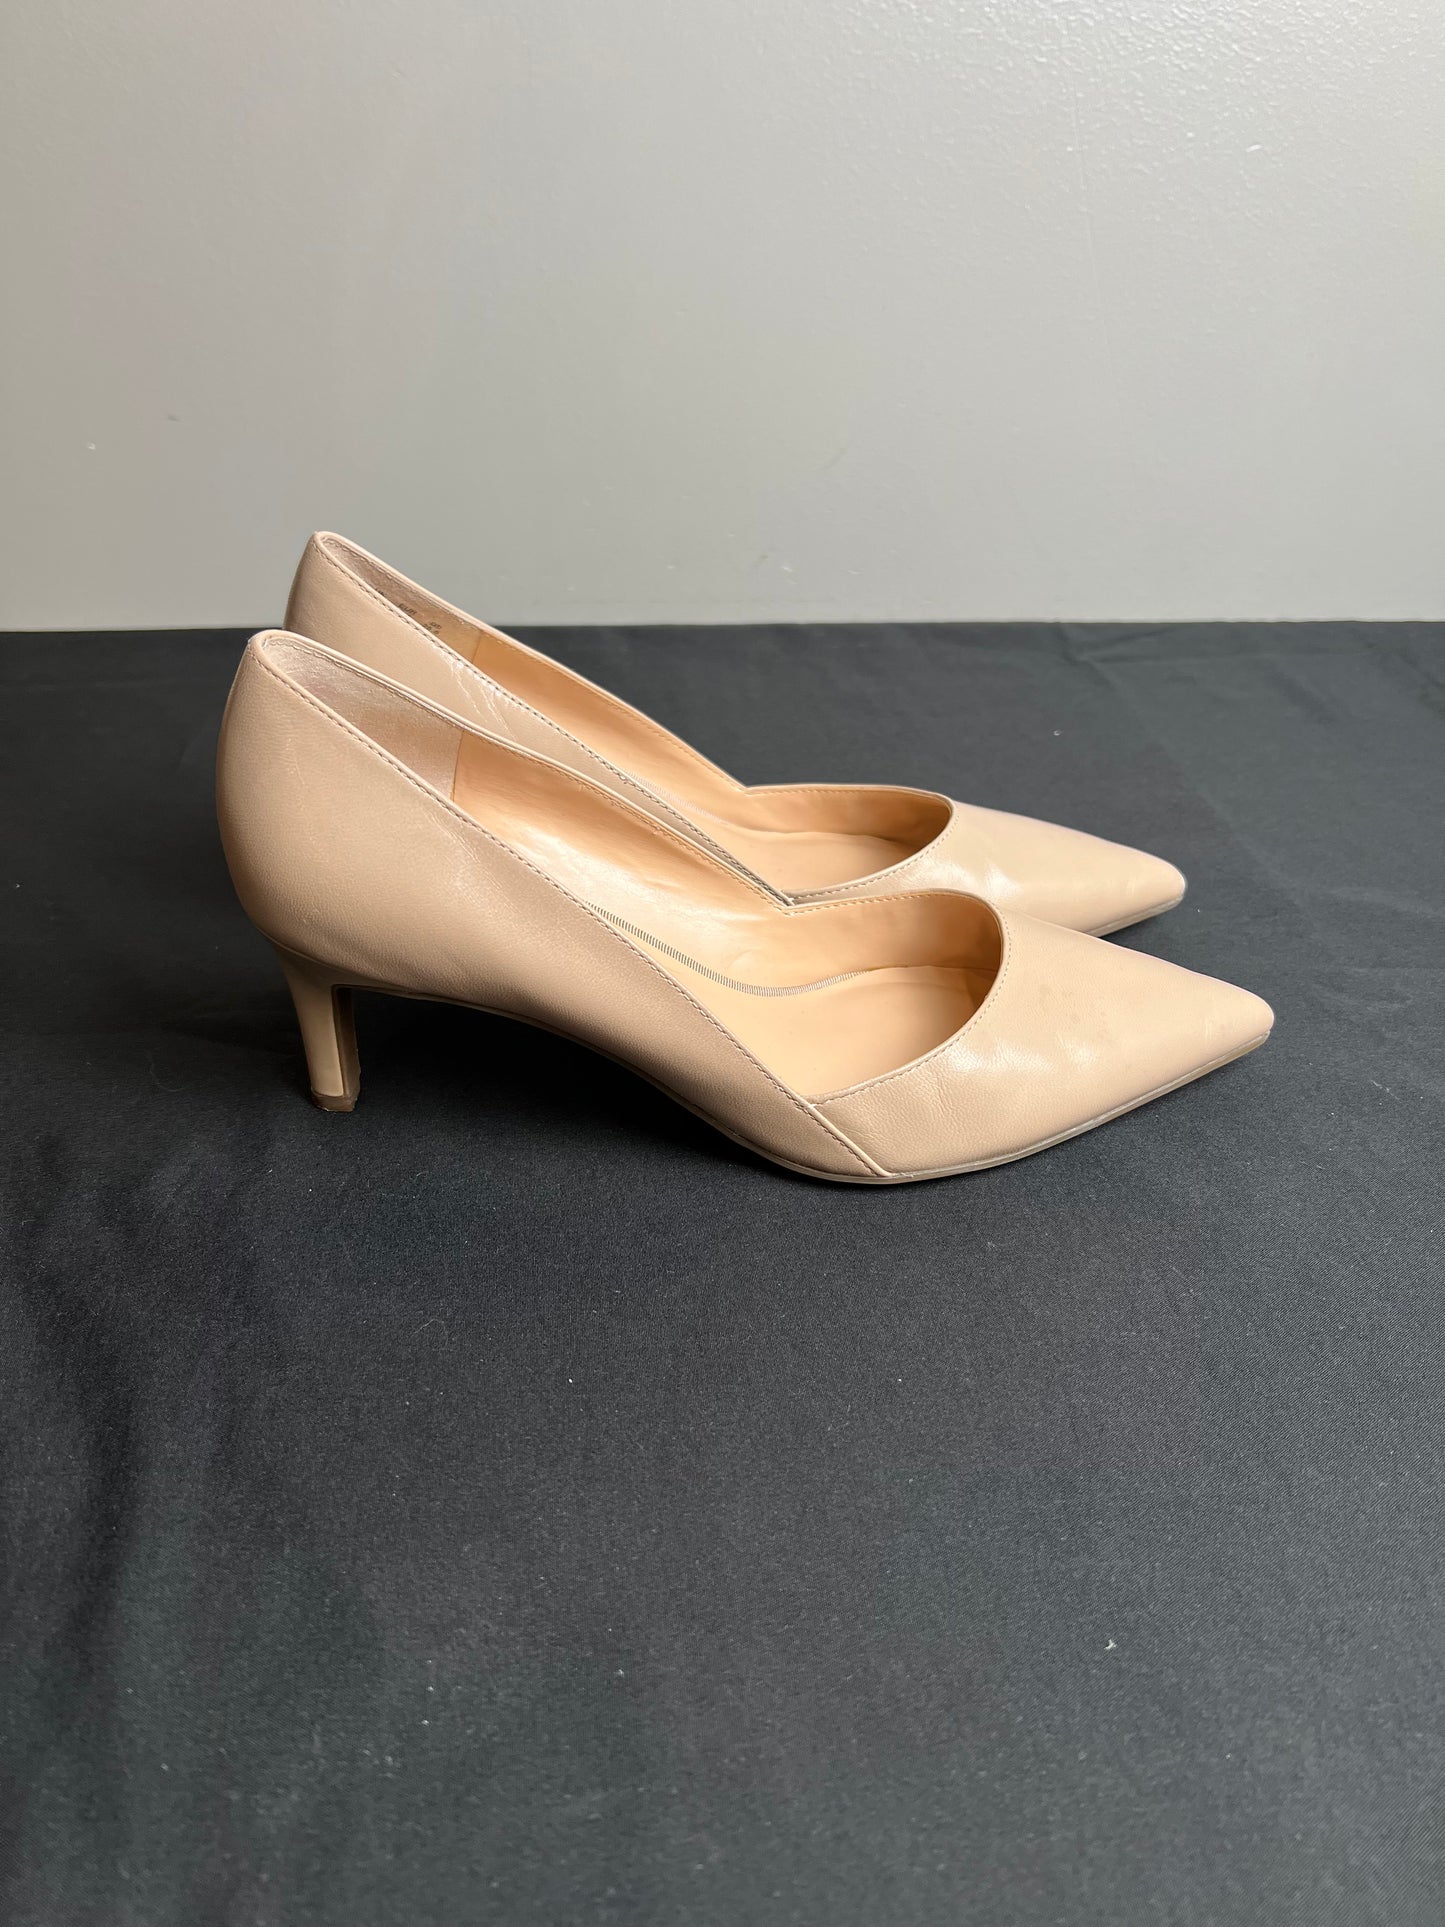 Shoes Heels Stiletto By Franco Sarto  Size: 8.5